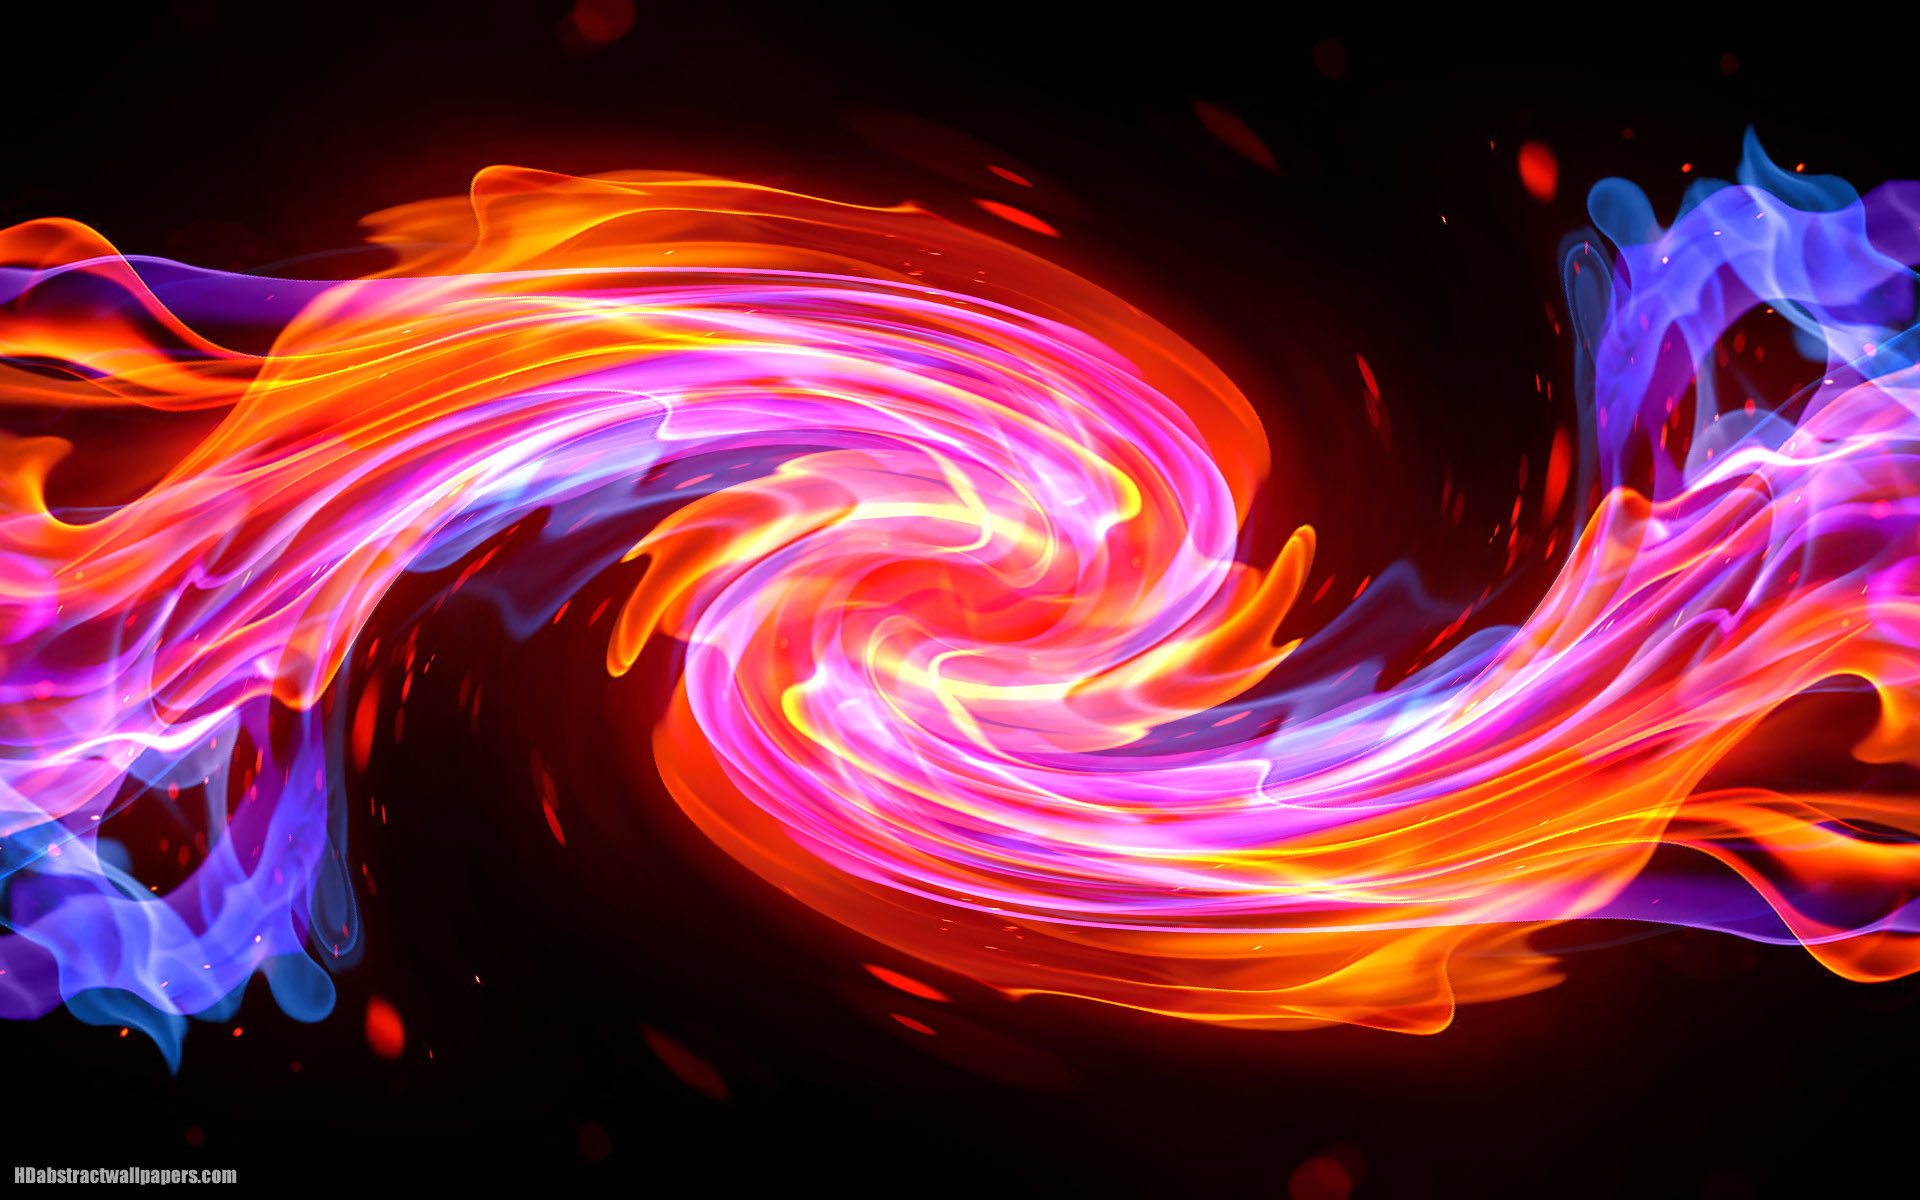 1920x1200 Abstract fire backgrounds. Abstract fire background with bright colors.